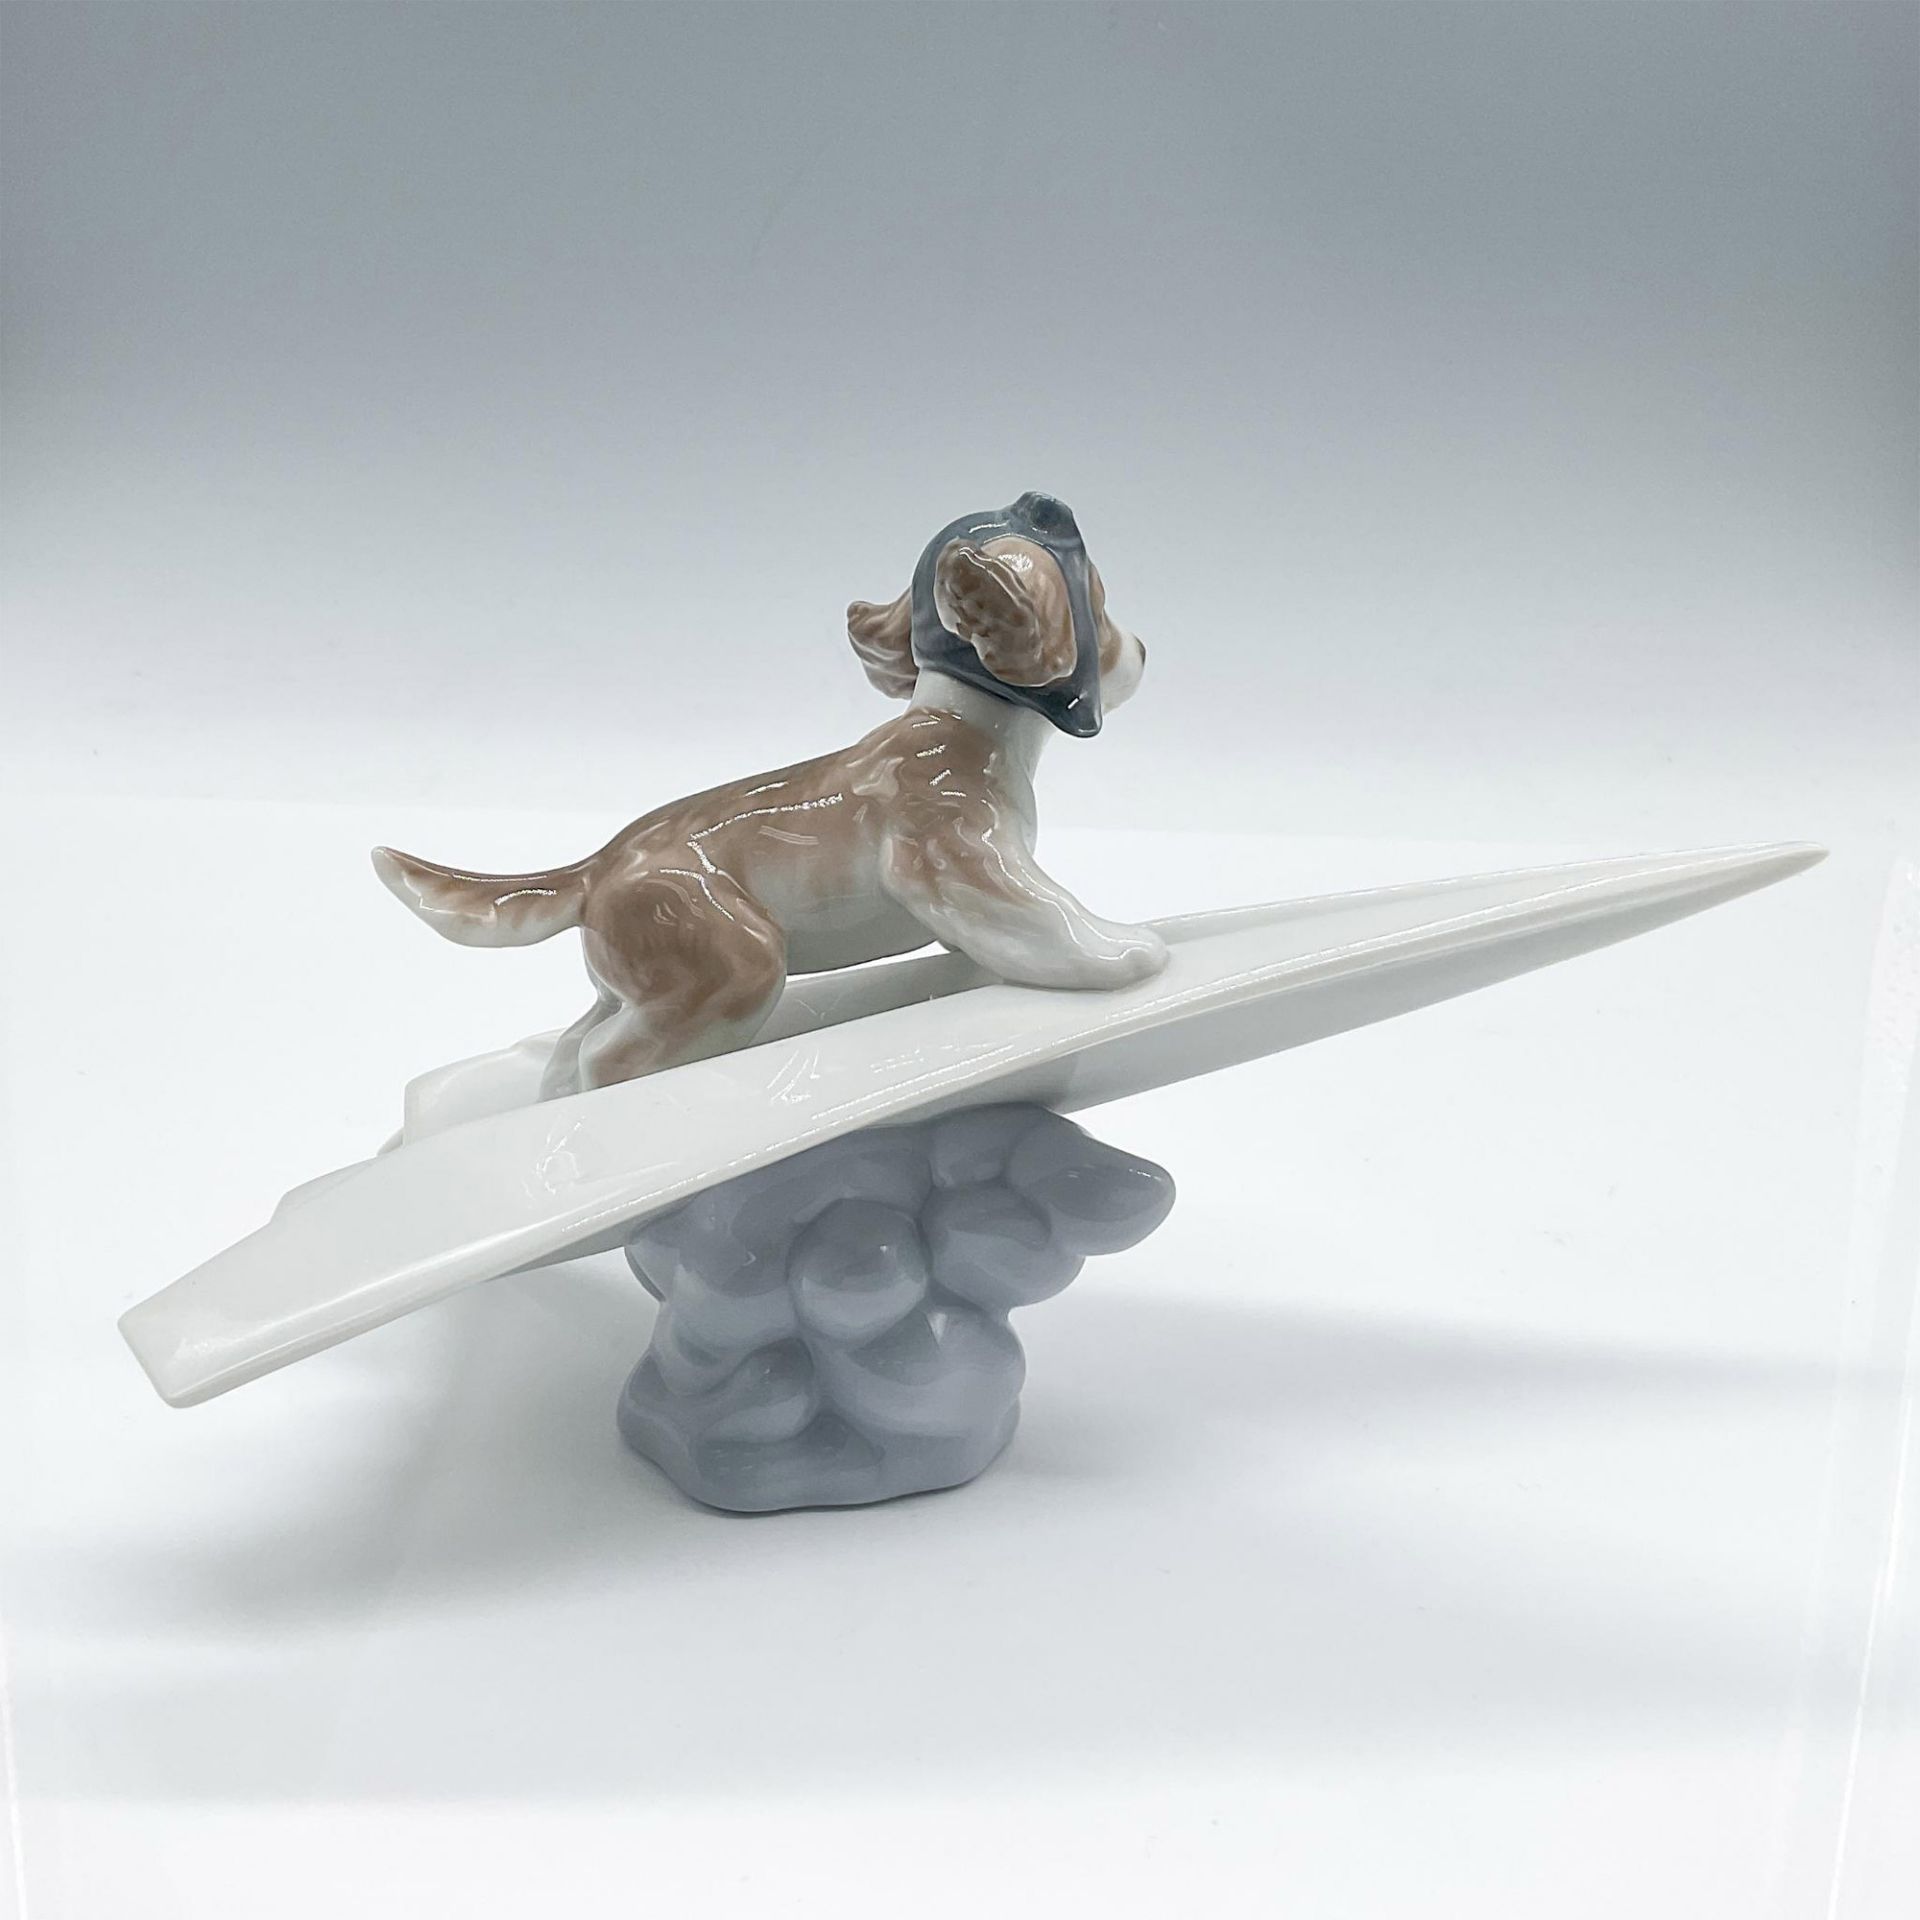 Lets Fly Away 1006665 - Lladro Porcelain Figurine - Image 2 of 5